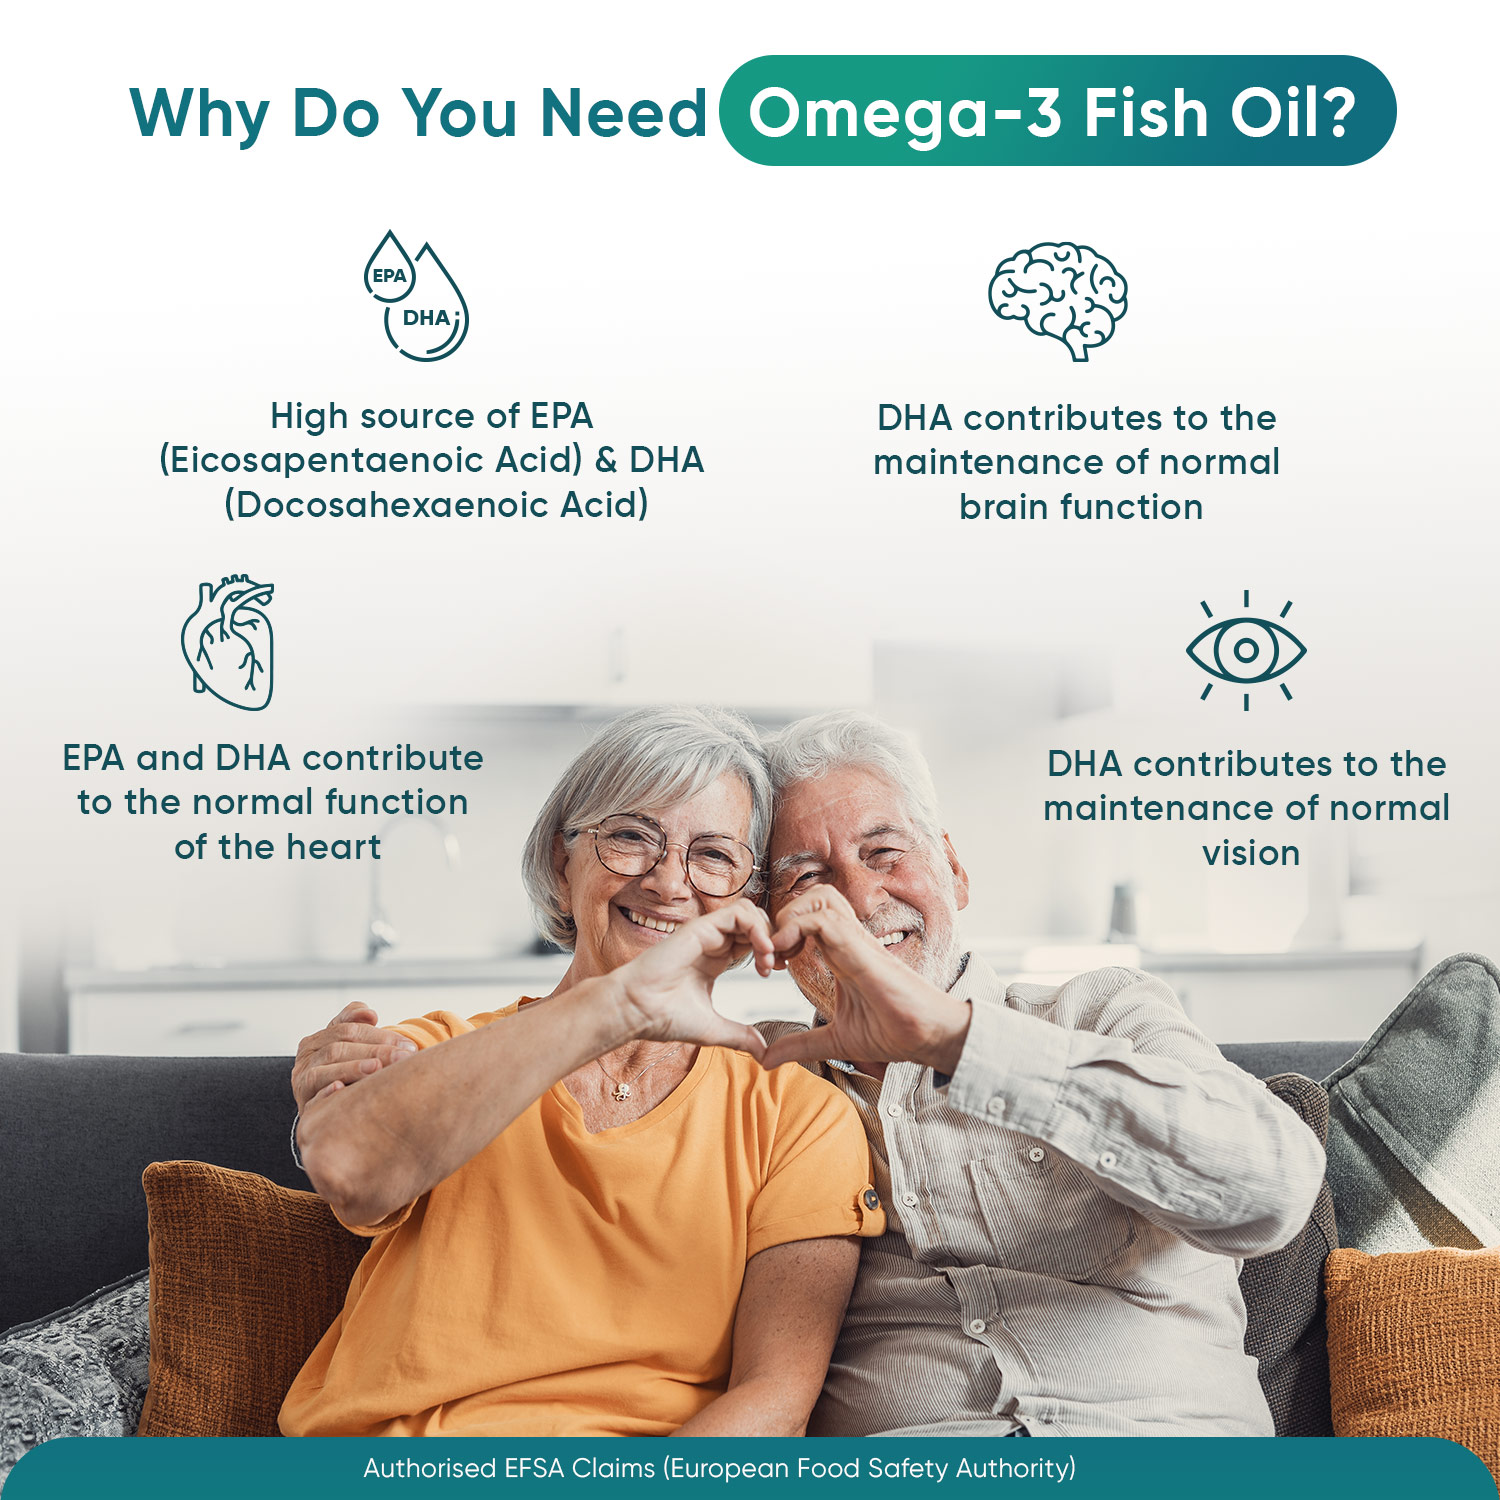 Omega 3 Fish Oil Softgel Capsules from EarthBiotics - General Overview